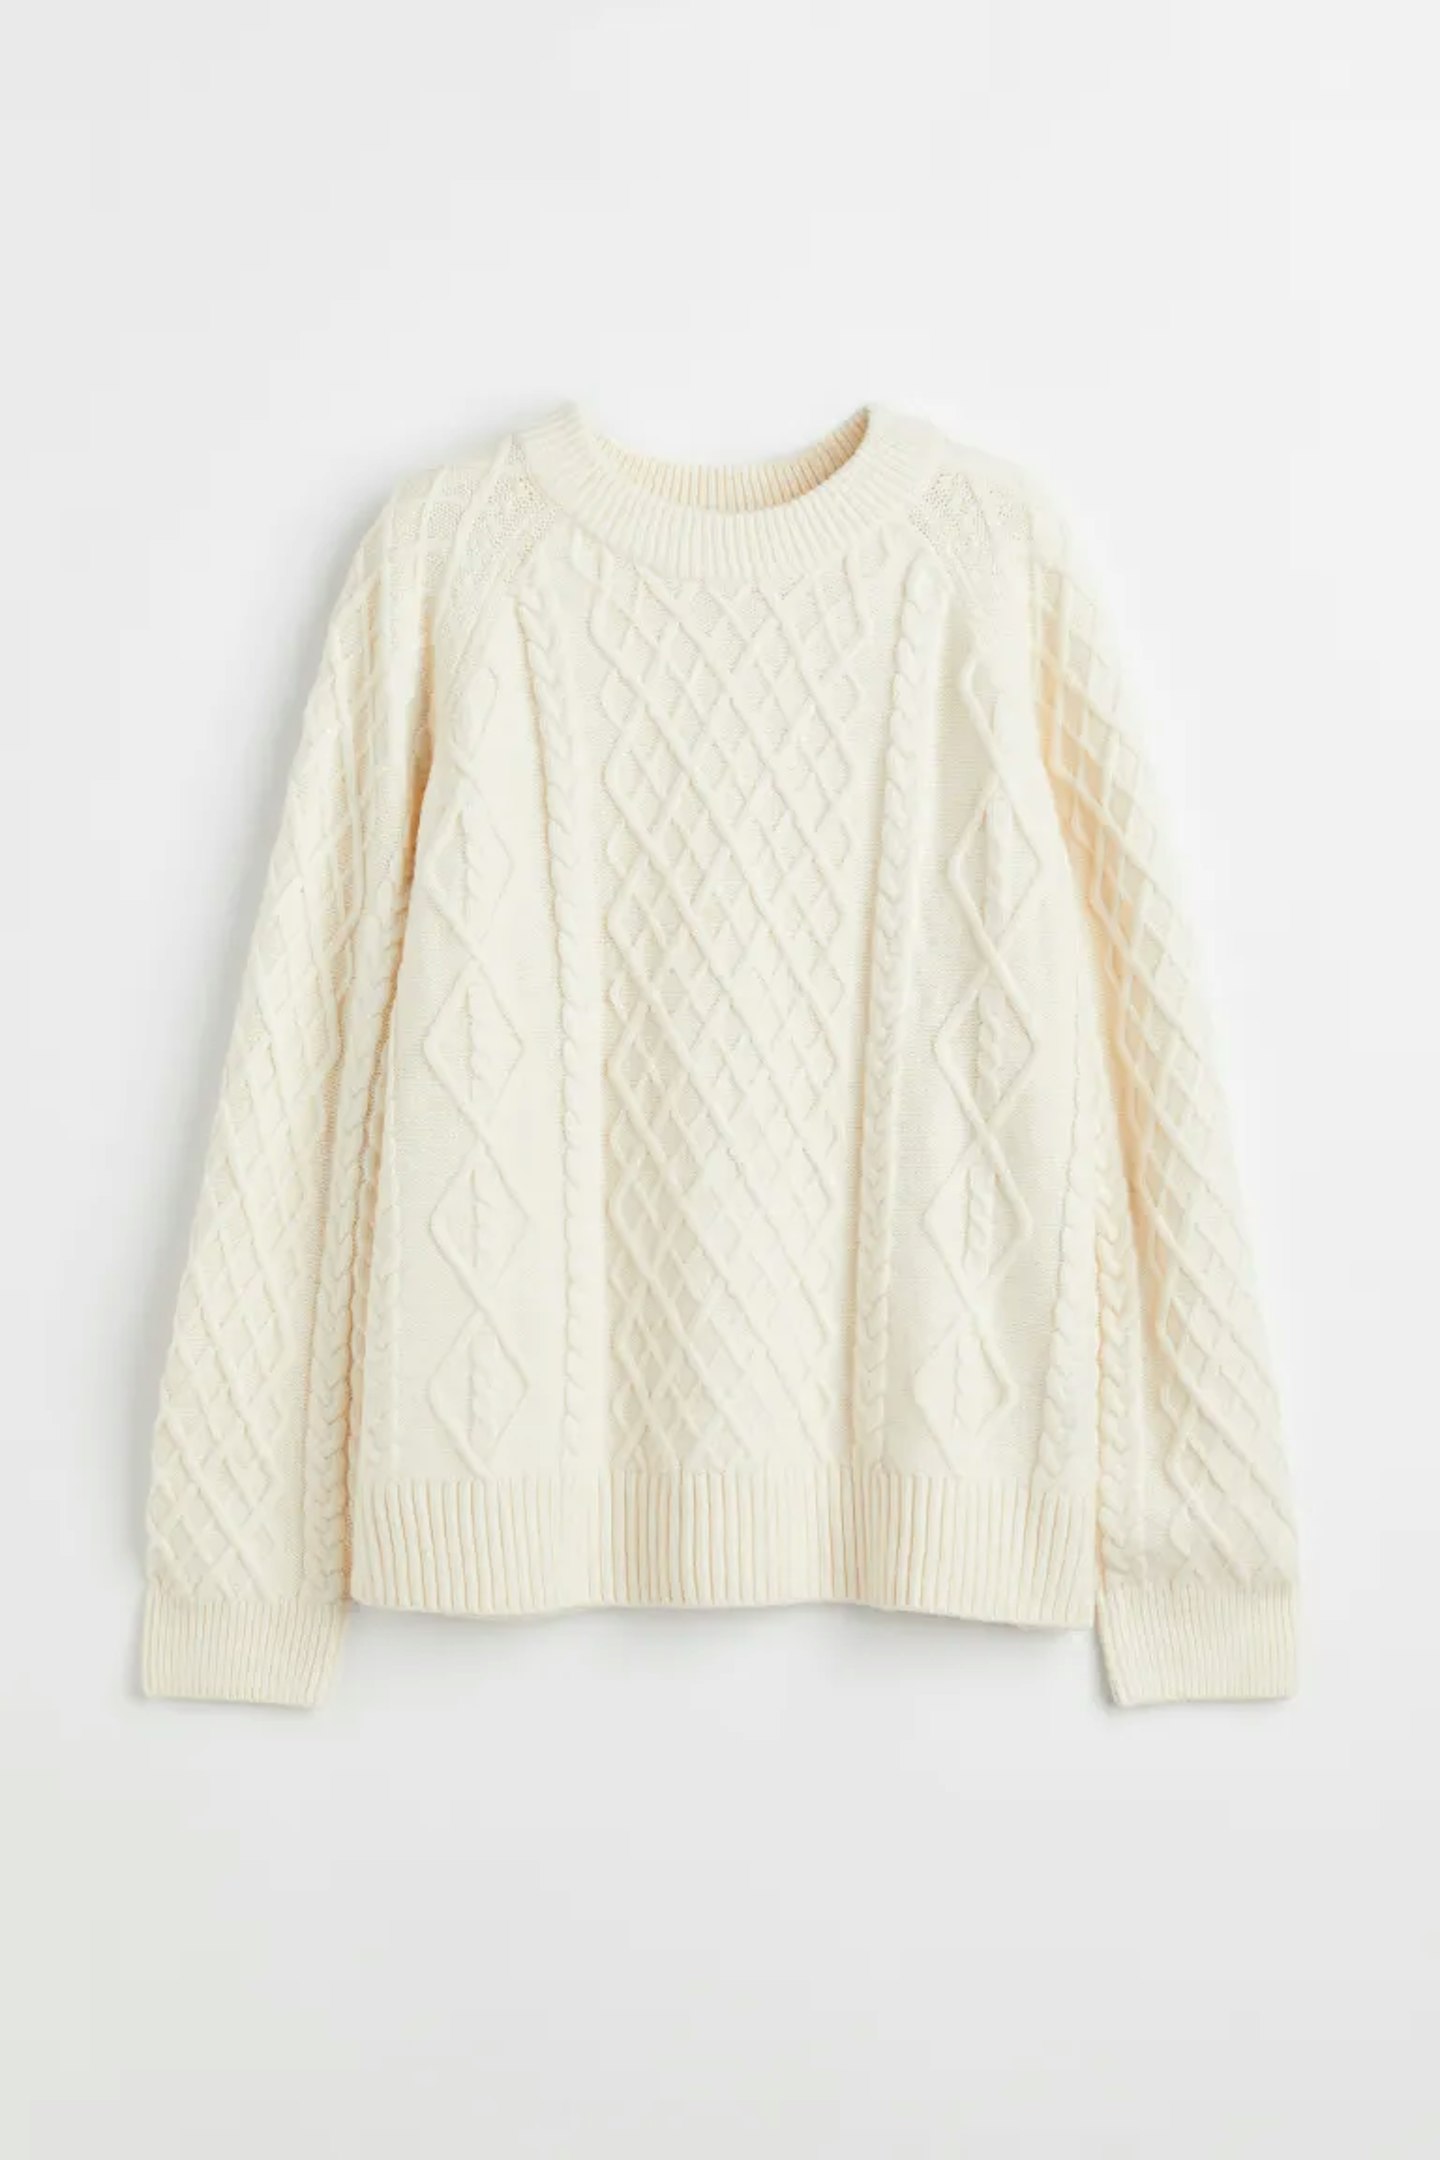 H&M, Cable-Knit Jumper